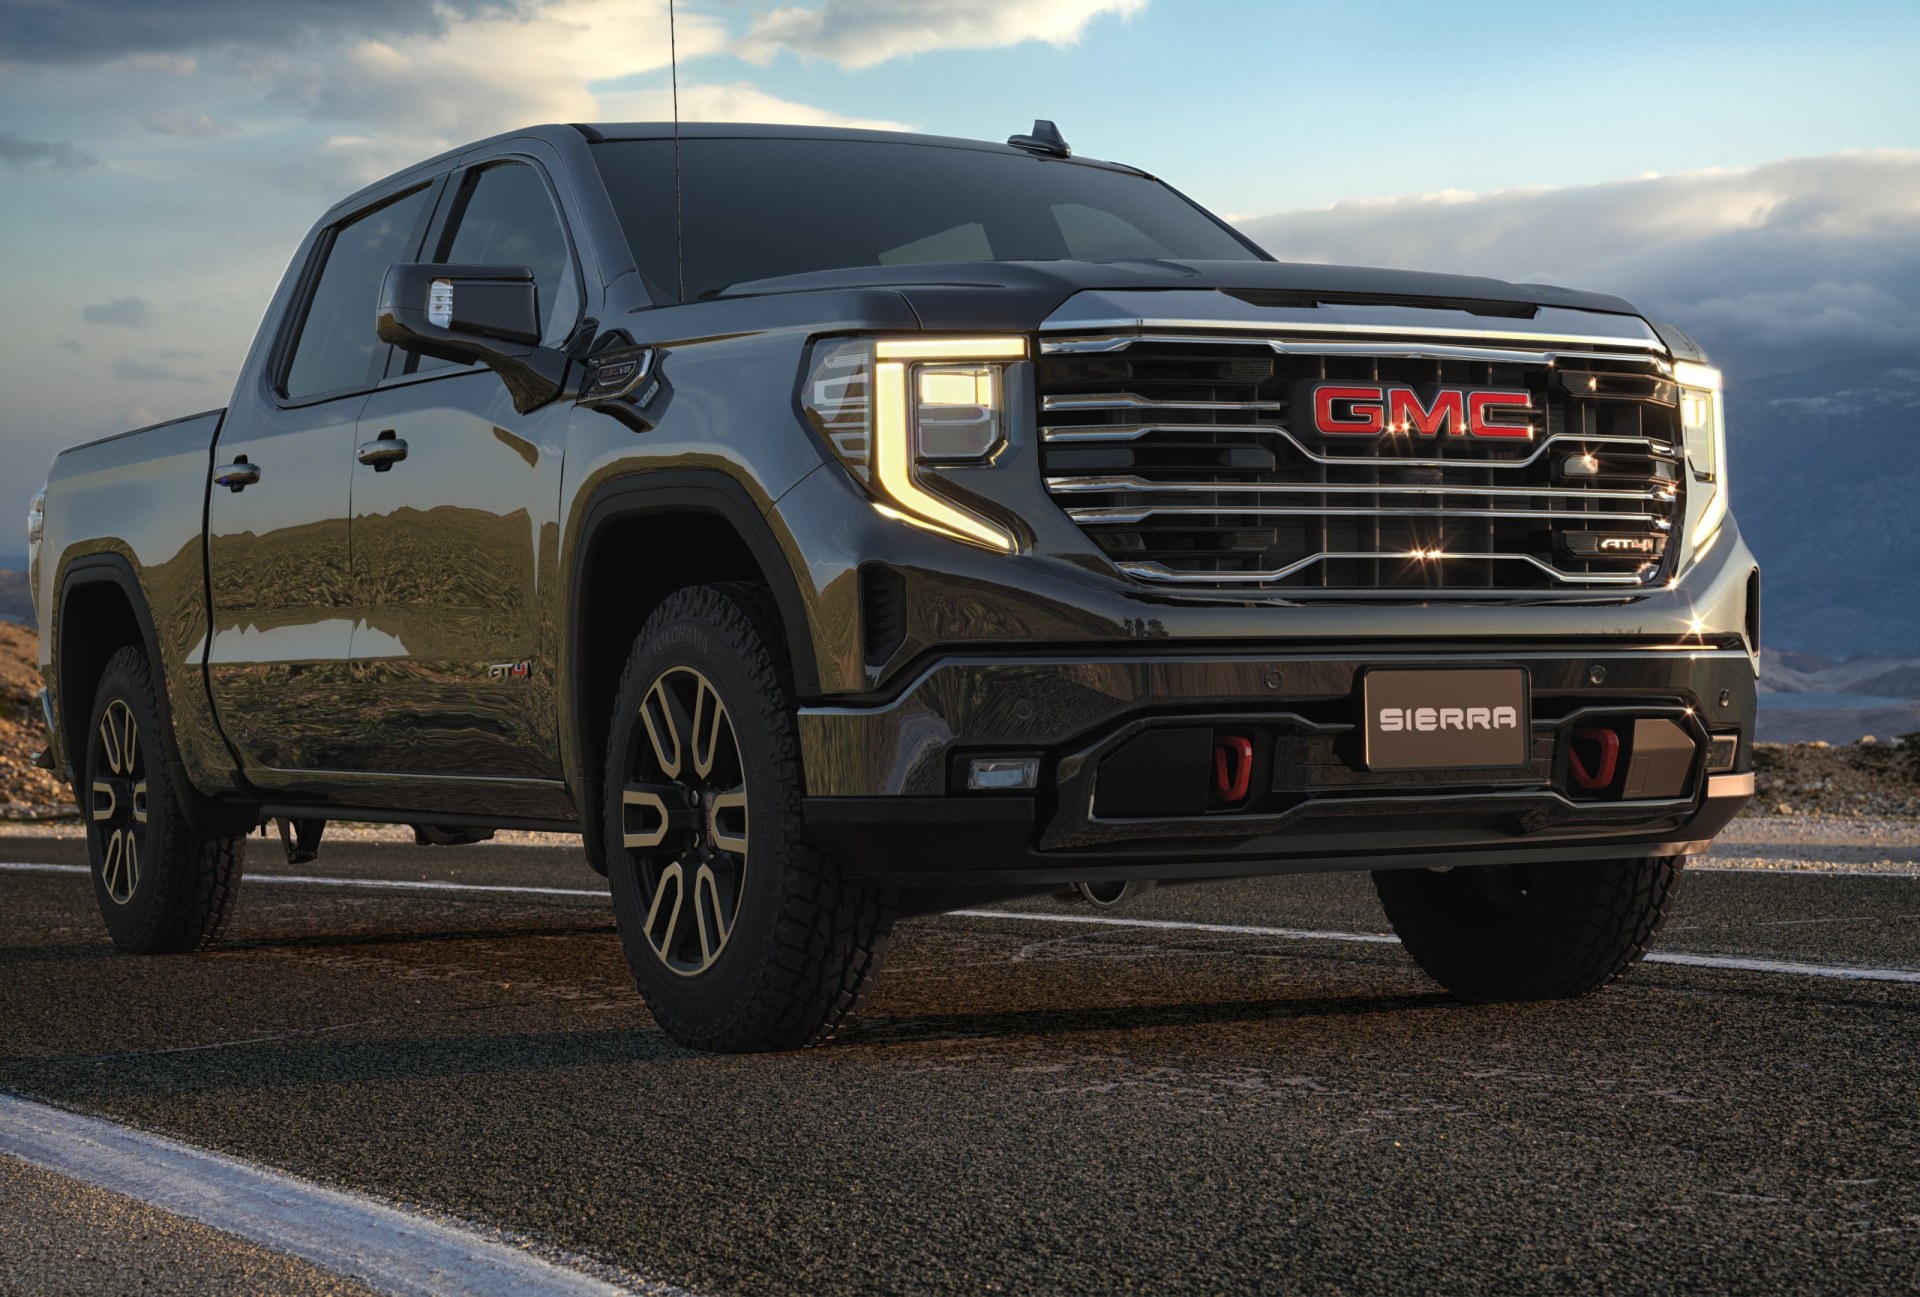 P2C7A GMC Sierra Code - Ultimate Guide to Diagnose and Fix